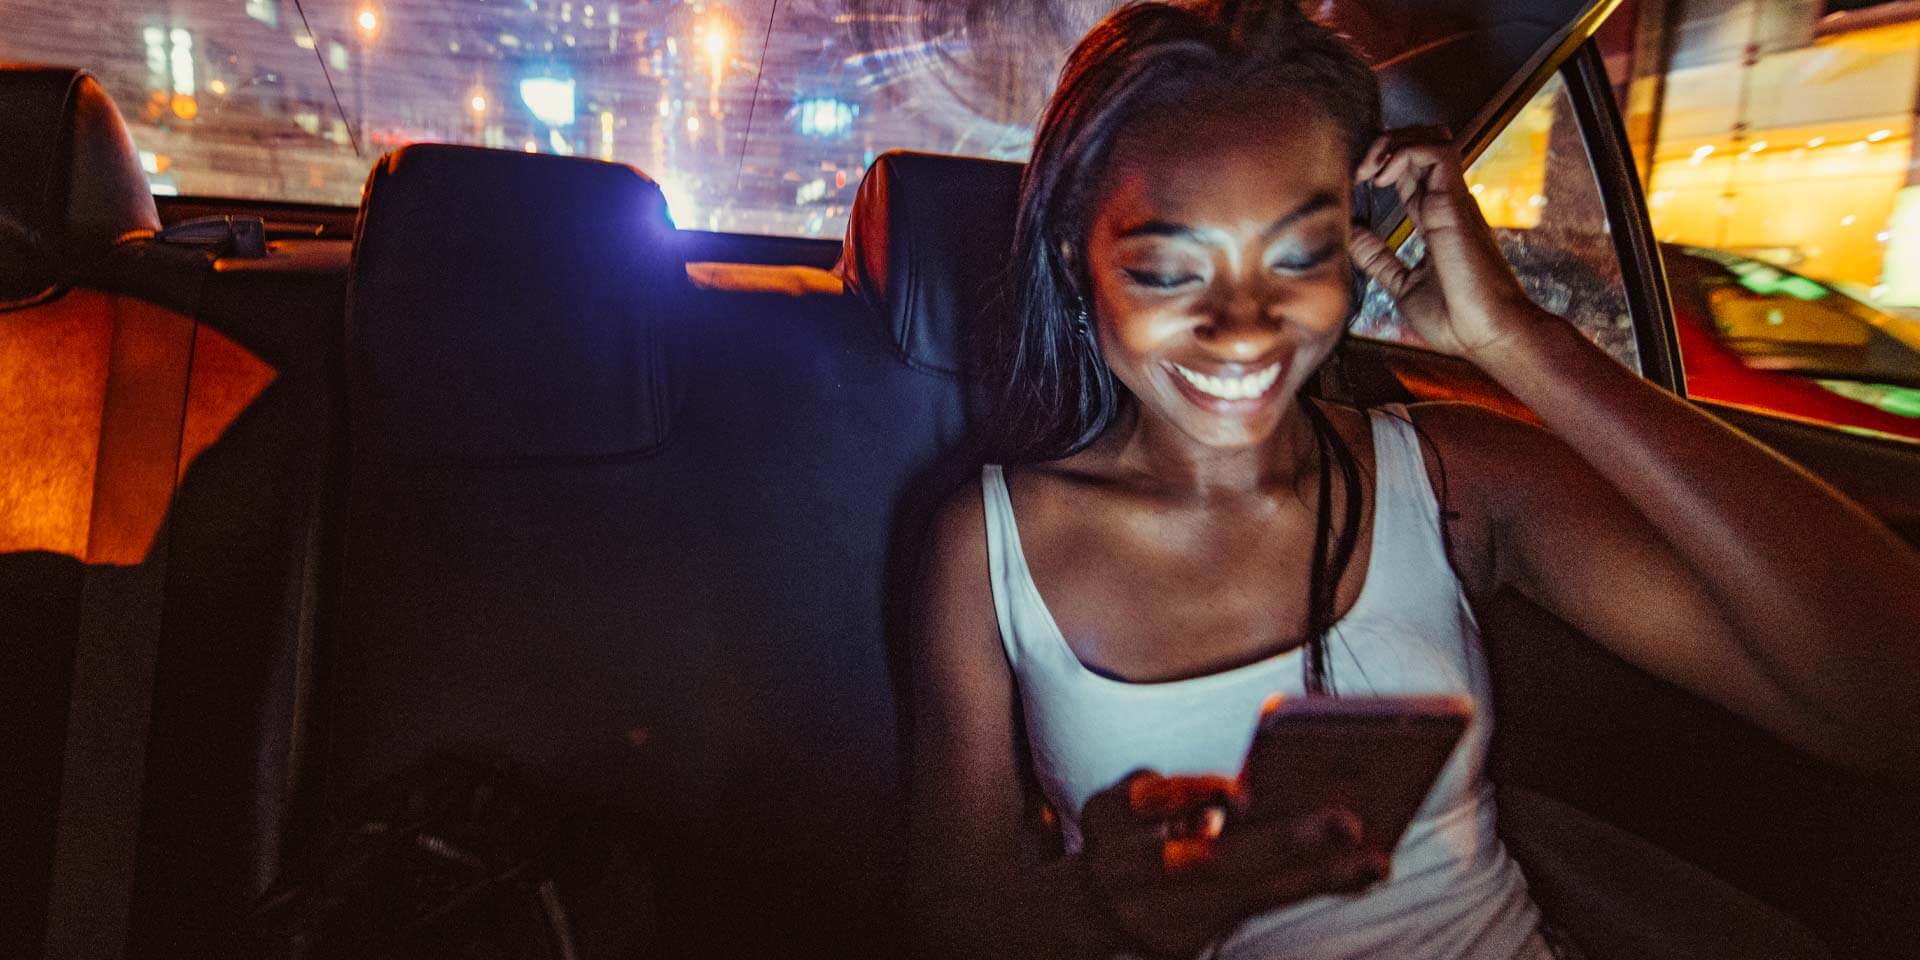 A young woman in the back seat of a car smiles while making digital payments from her phone